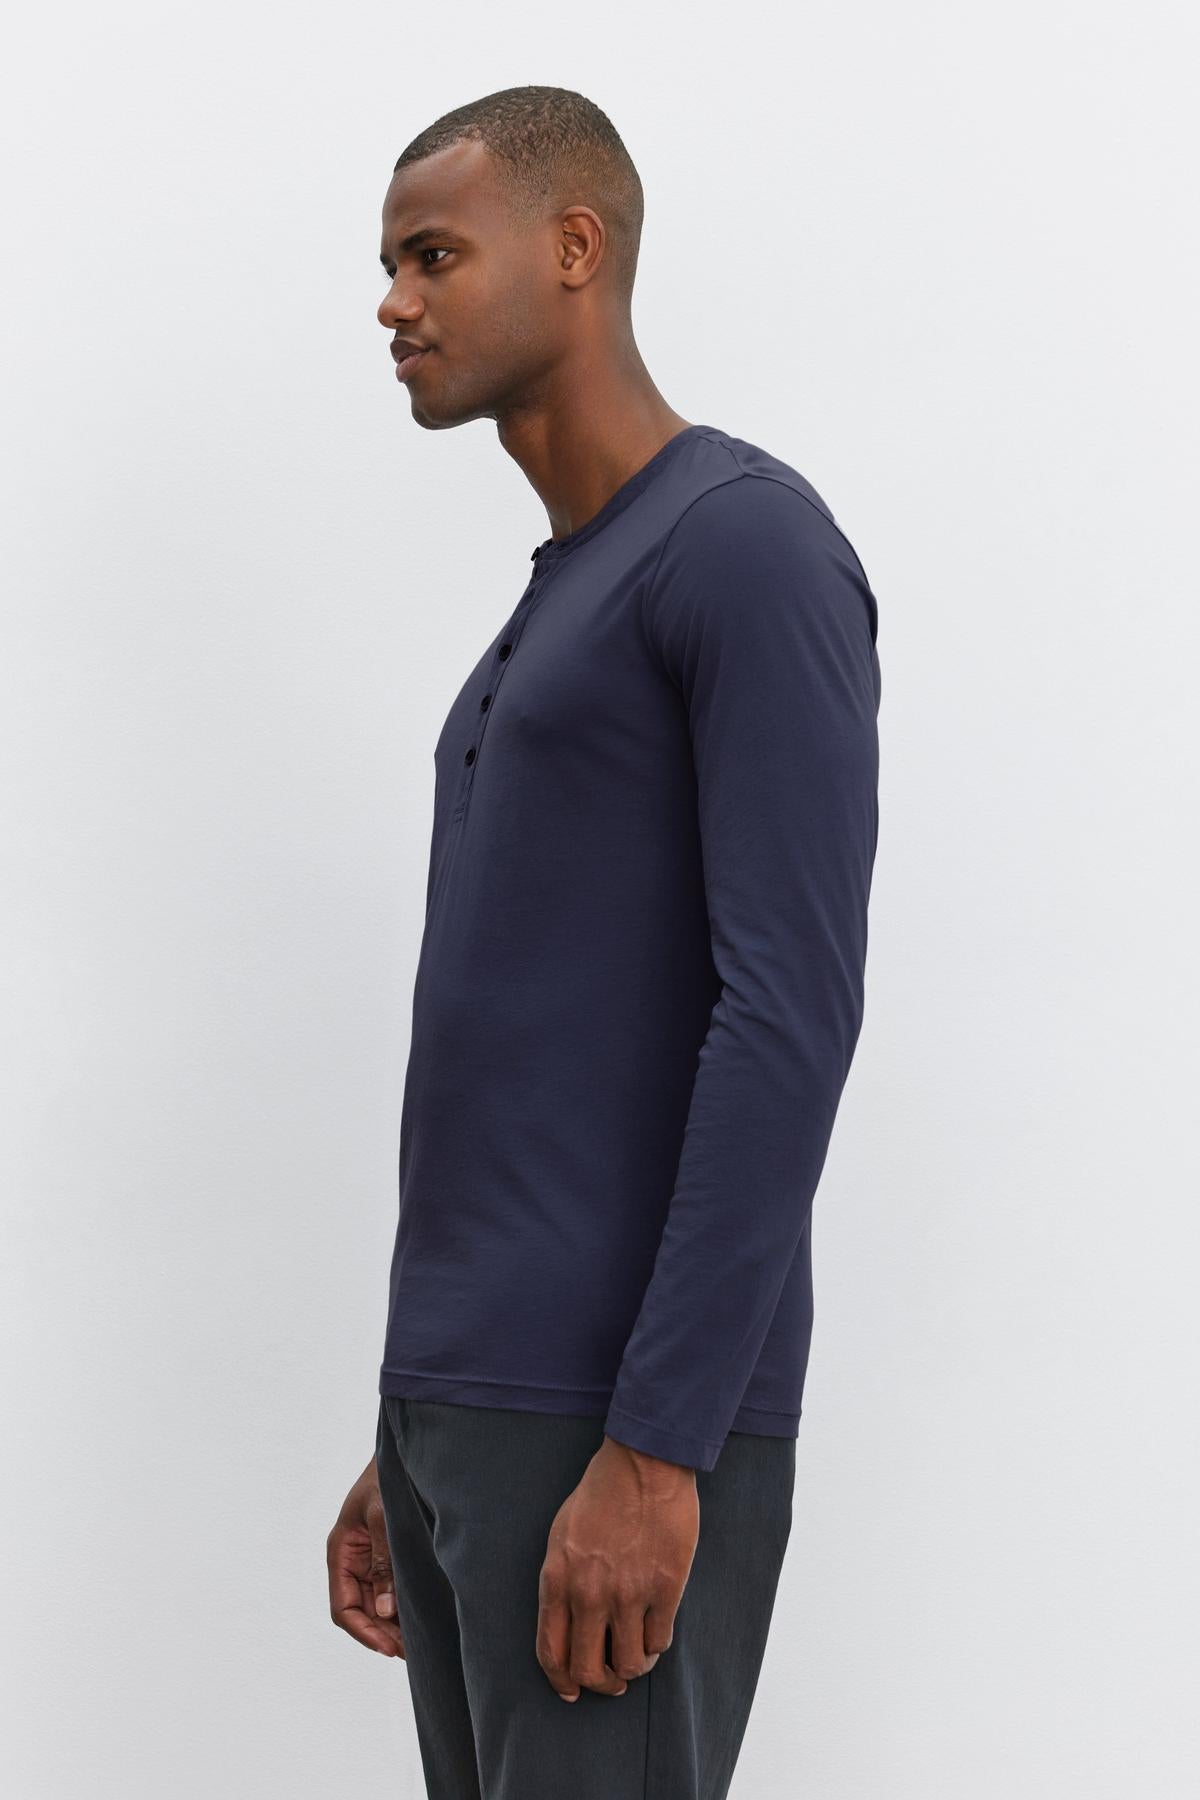   The man is wearing a lightweight navy ALVARO COTTON JERSEY HENLEY long-sleeved t-shirt by Velvet by Graham & Spencer. 